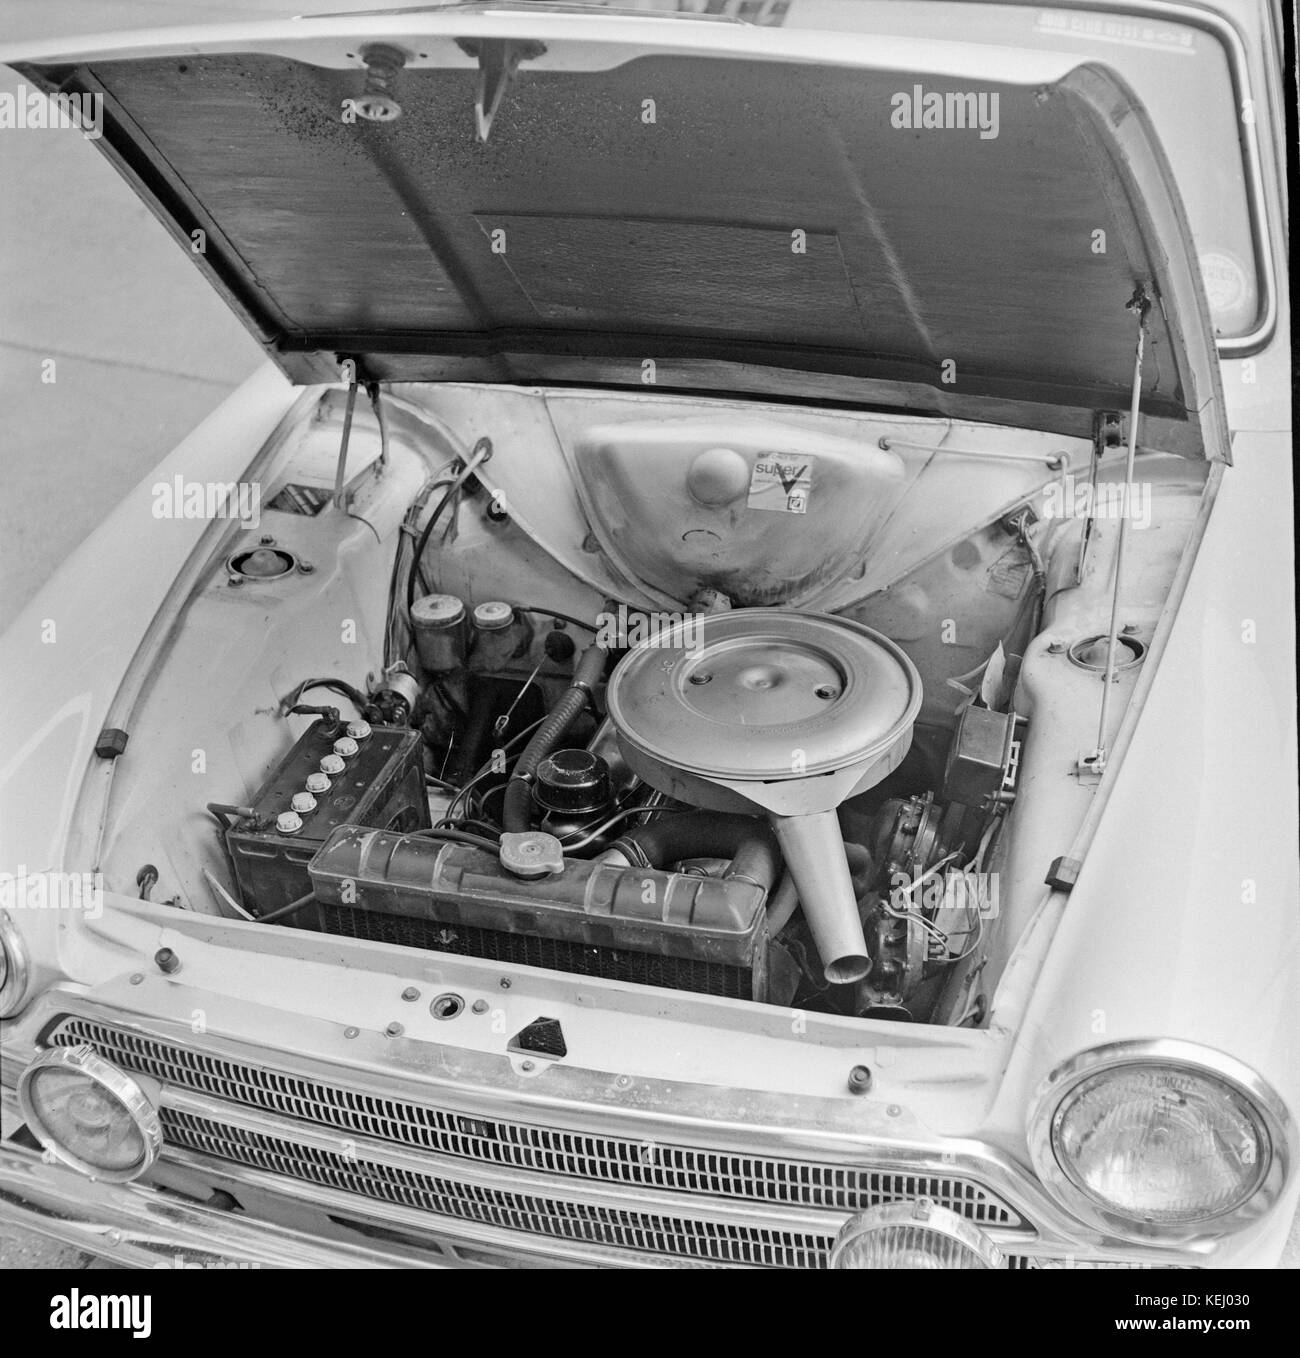 Press photos of the engine bay of  a 1966 Ford Cortina Mk 1 GT, shown outside Newspaper House in London. Photos taken on 21st October 1966. Stock Photo